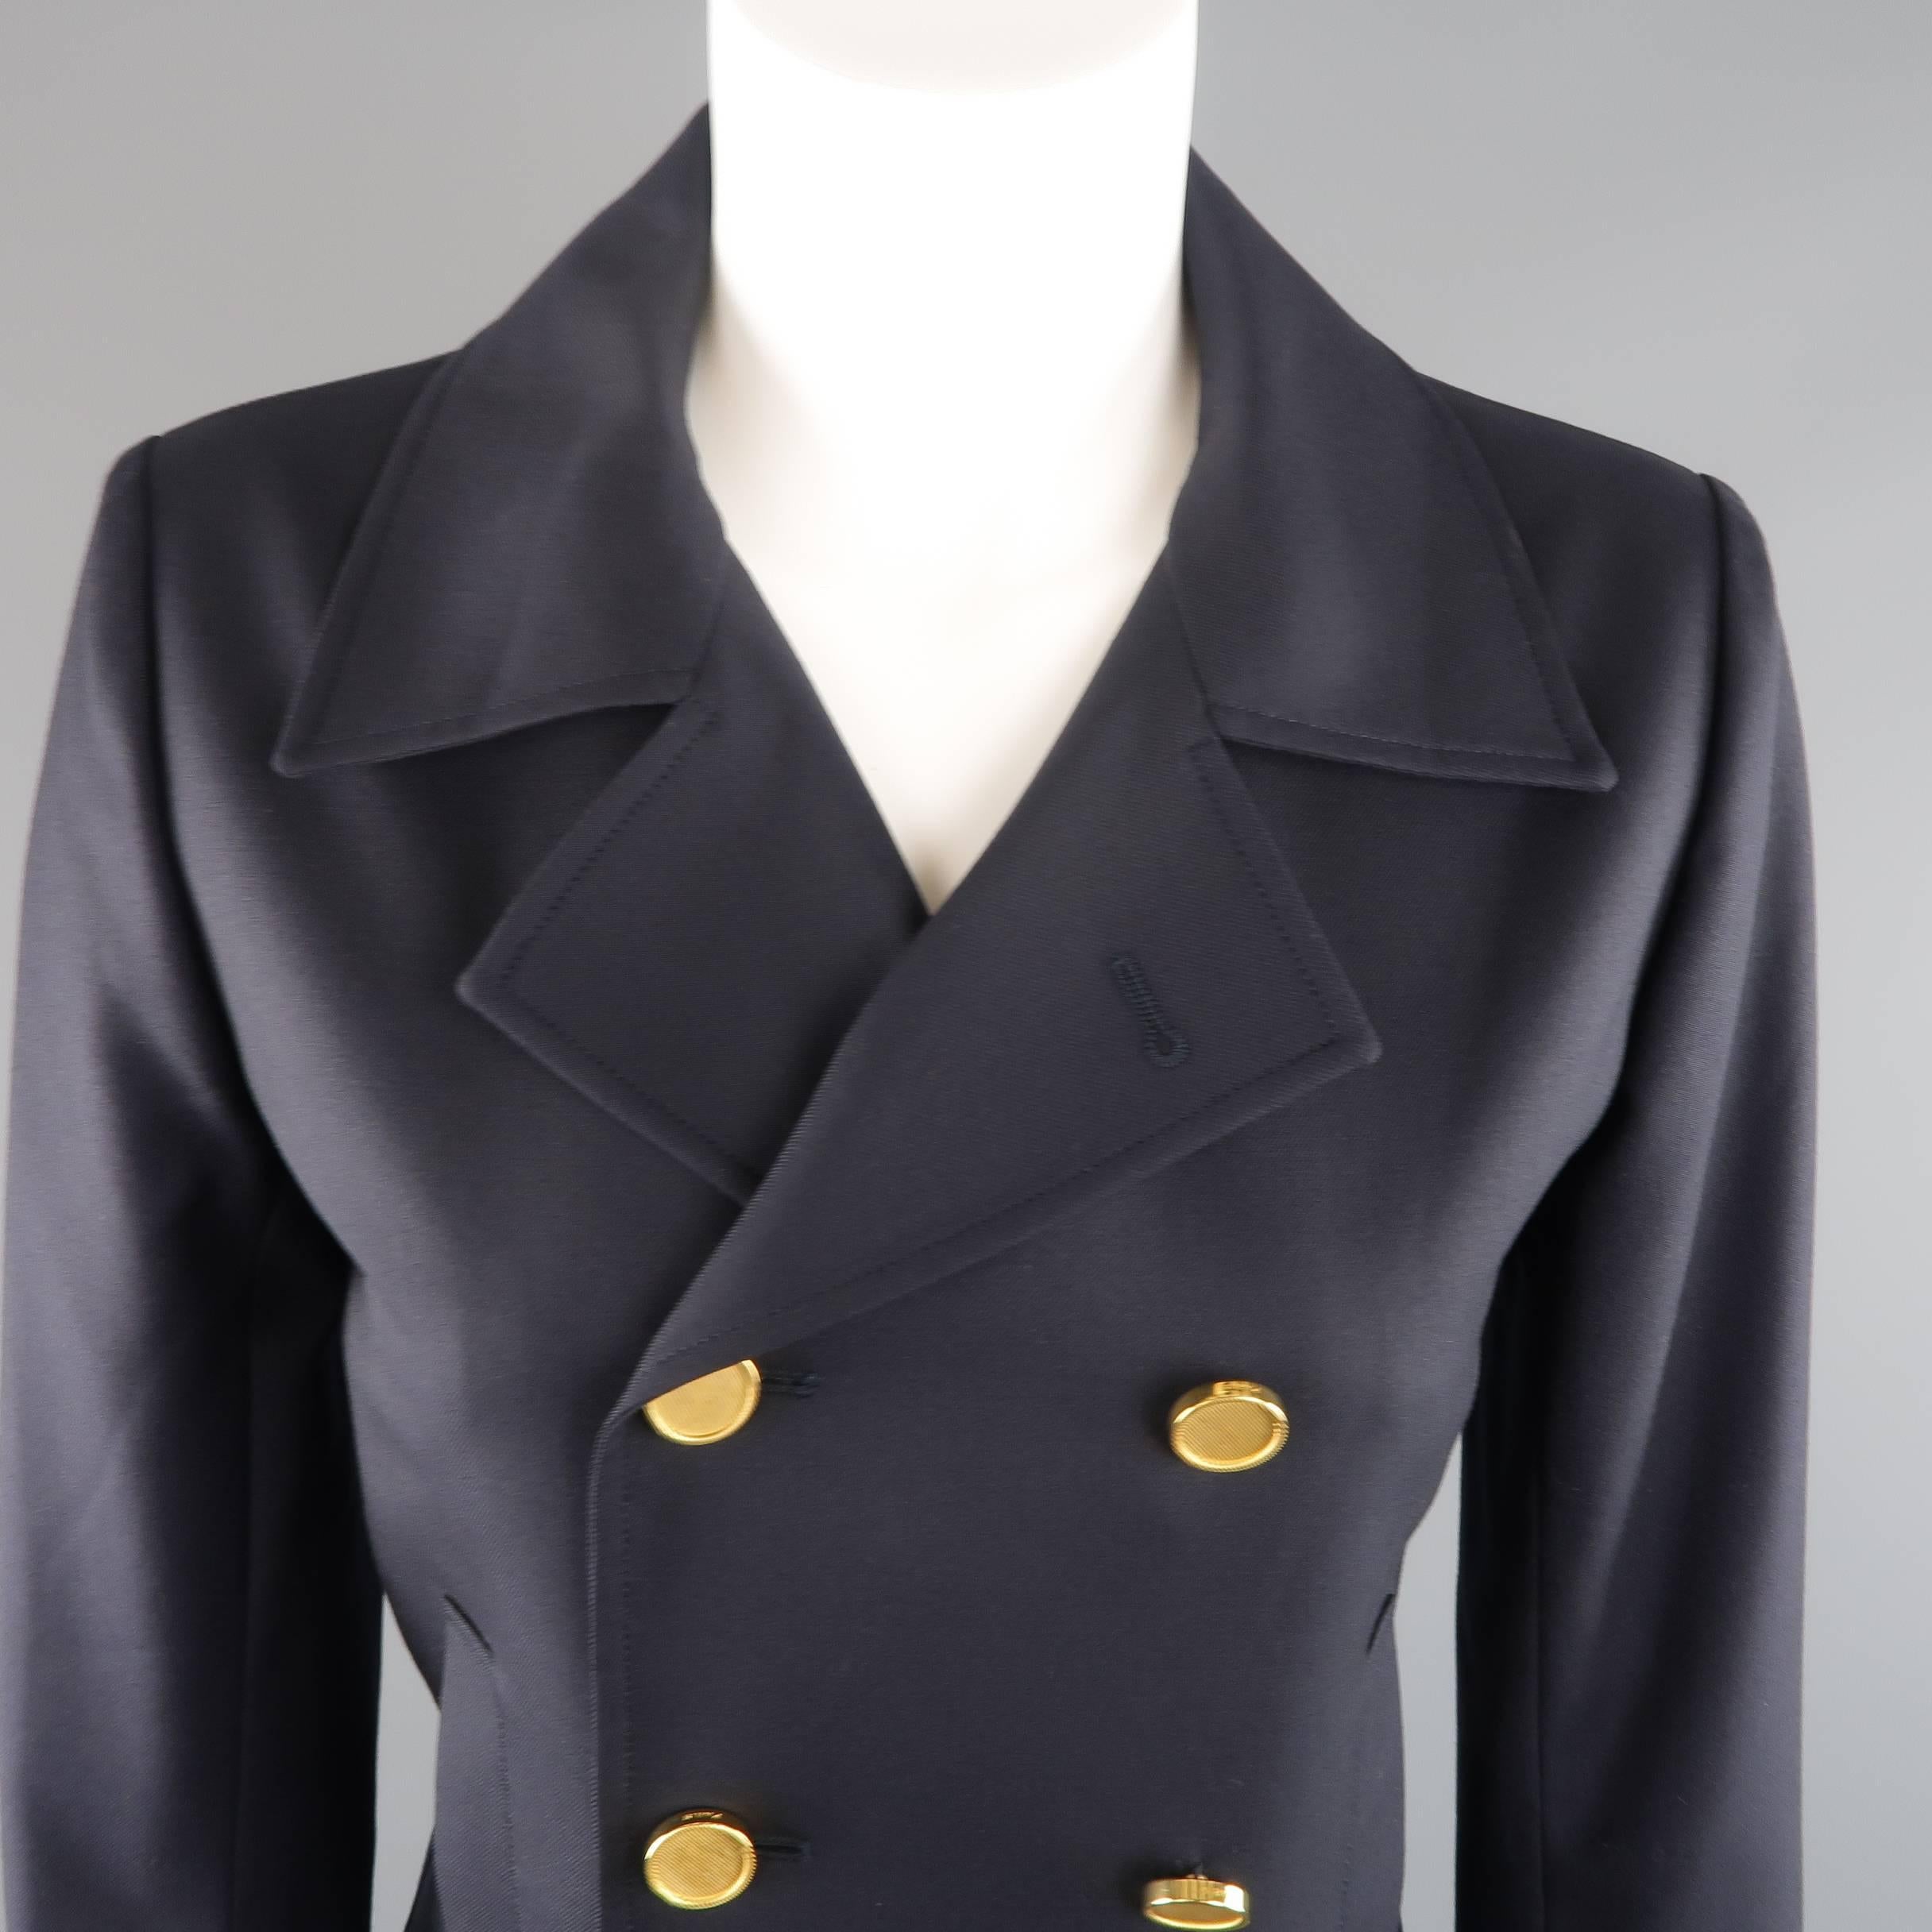 SAINT LAURENT by Hedi Slimane cropped jacket comes in navy wool twill and features a pointed lapel, slit pockets, and double breasted front with gold tone metal buttons. Made in Italy.
 
Excellent Pre-Owned Condition.
Marked: F38
 
Measurements:
